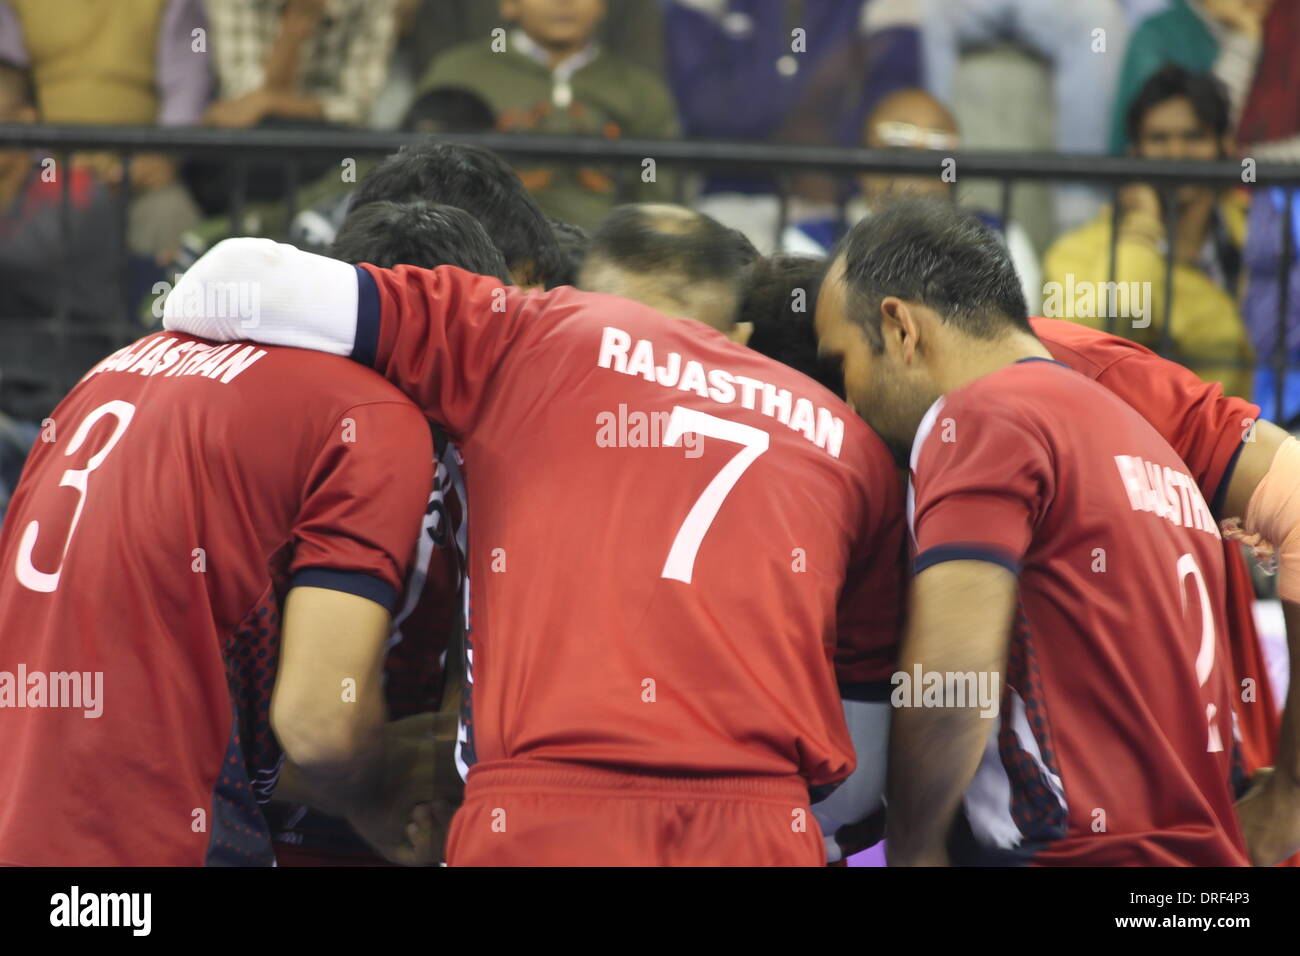 Pataliputra Sports Complex, Kankarbagh, Patna, Bihar, India, 24th January 2014. Rajasthan team chalk out game plan during final as Rajasthan beats Haryana 27 – 25 in a keenly contested final of the Jannayak Karpoori Thakur 61st Senior Indian National Kabaddi Championship on Friday evening. Rajasthan men dished out an impressive performance with a perfect game plan despite the strong and unexpected resistance coming from the youthful Haryana team. Credit:  Rupa Ghosh/Alamy Live News. Stock Photo